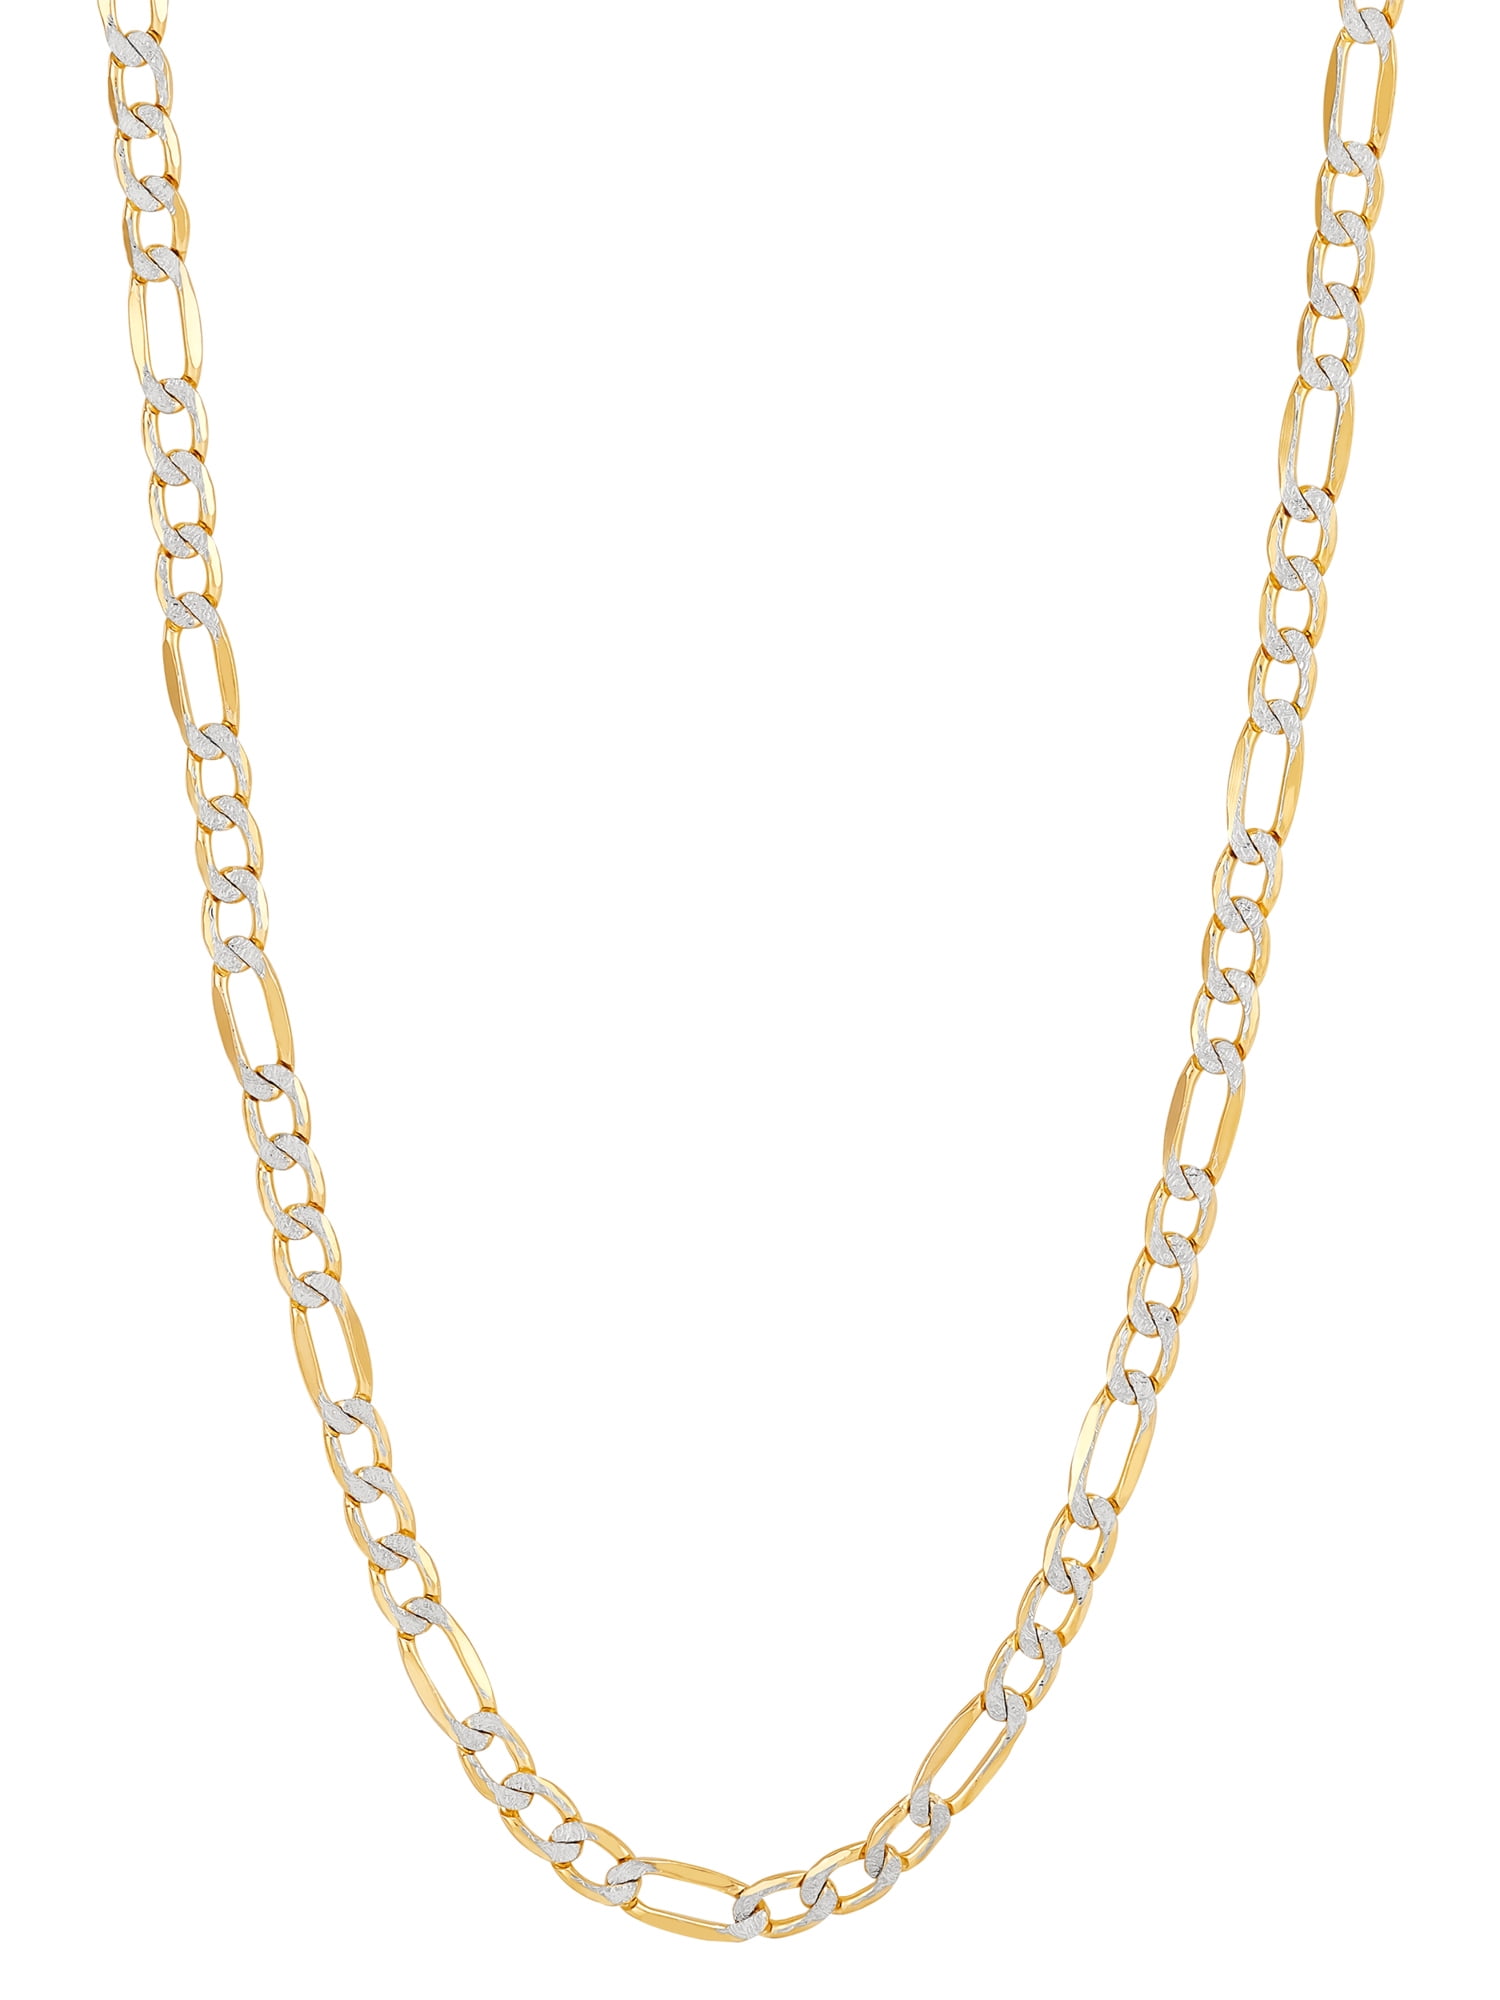 Women’s Long Royal Blue Acrylic Chain Link Necklace